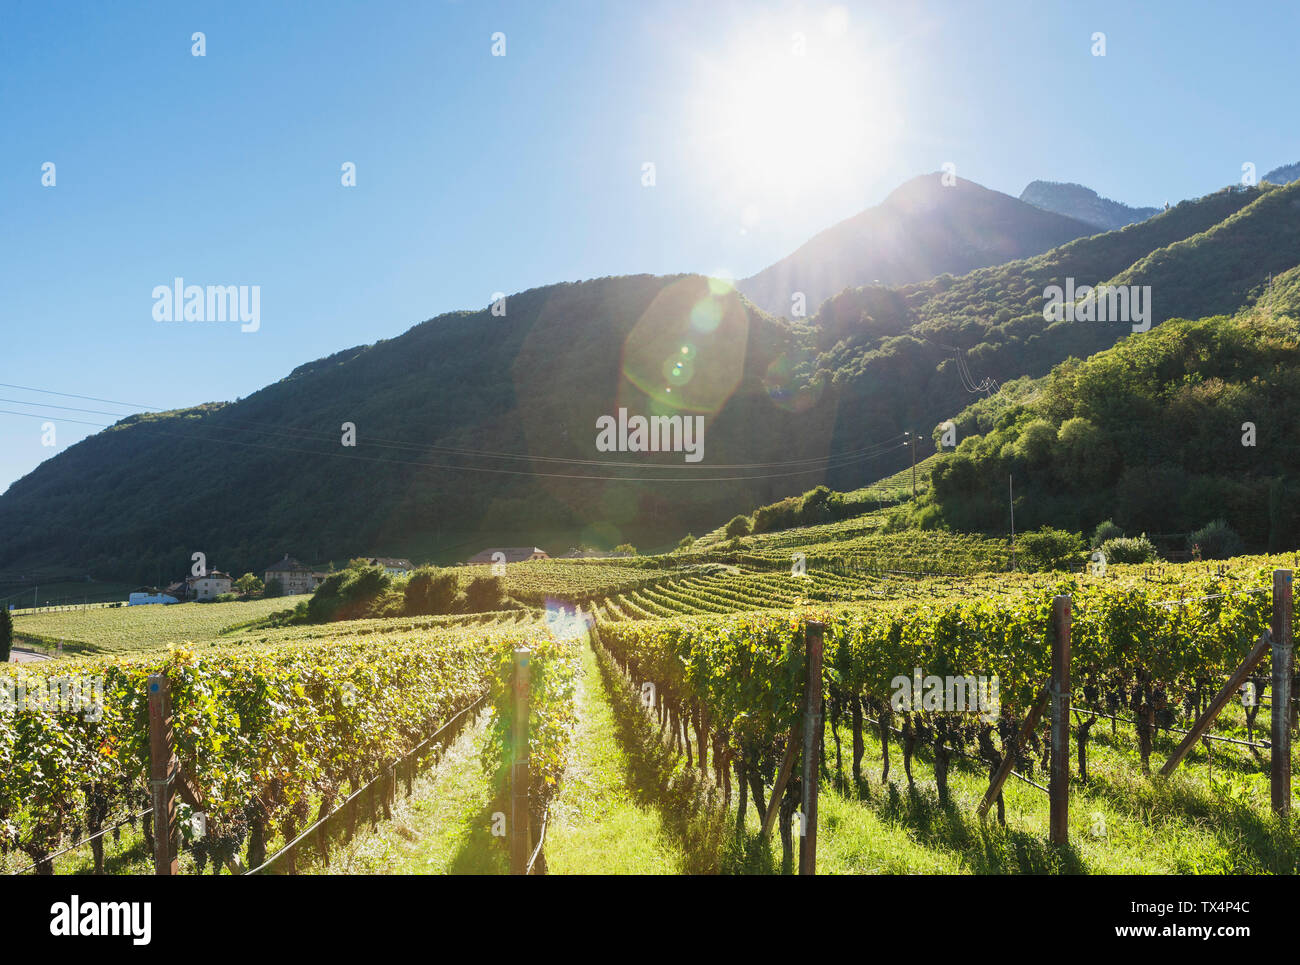 Italy, South Tyrol, Ueberetsch, vinyards with blue grapes in sunshine Stock Photo